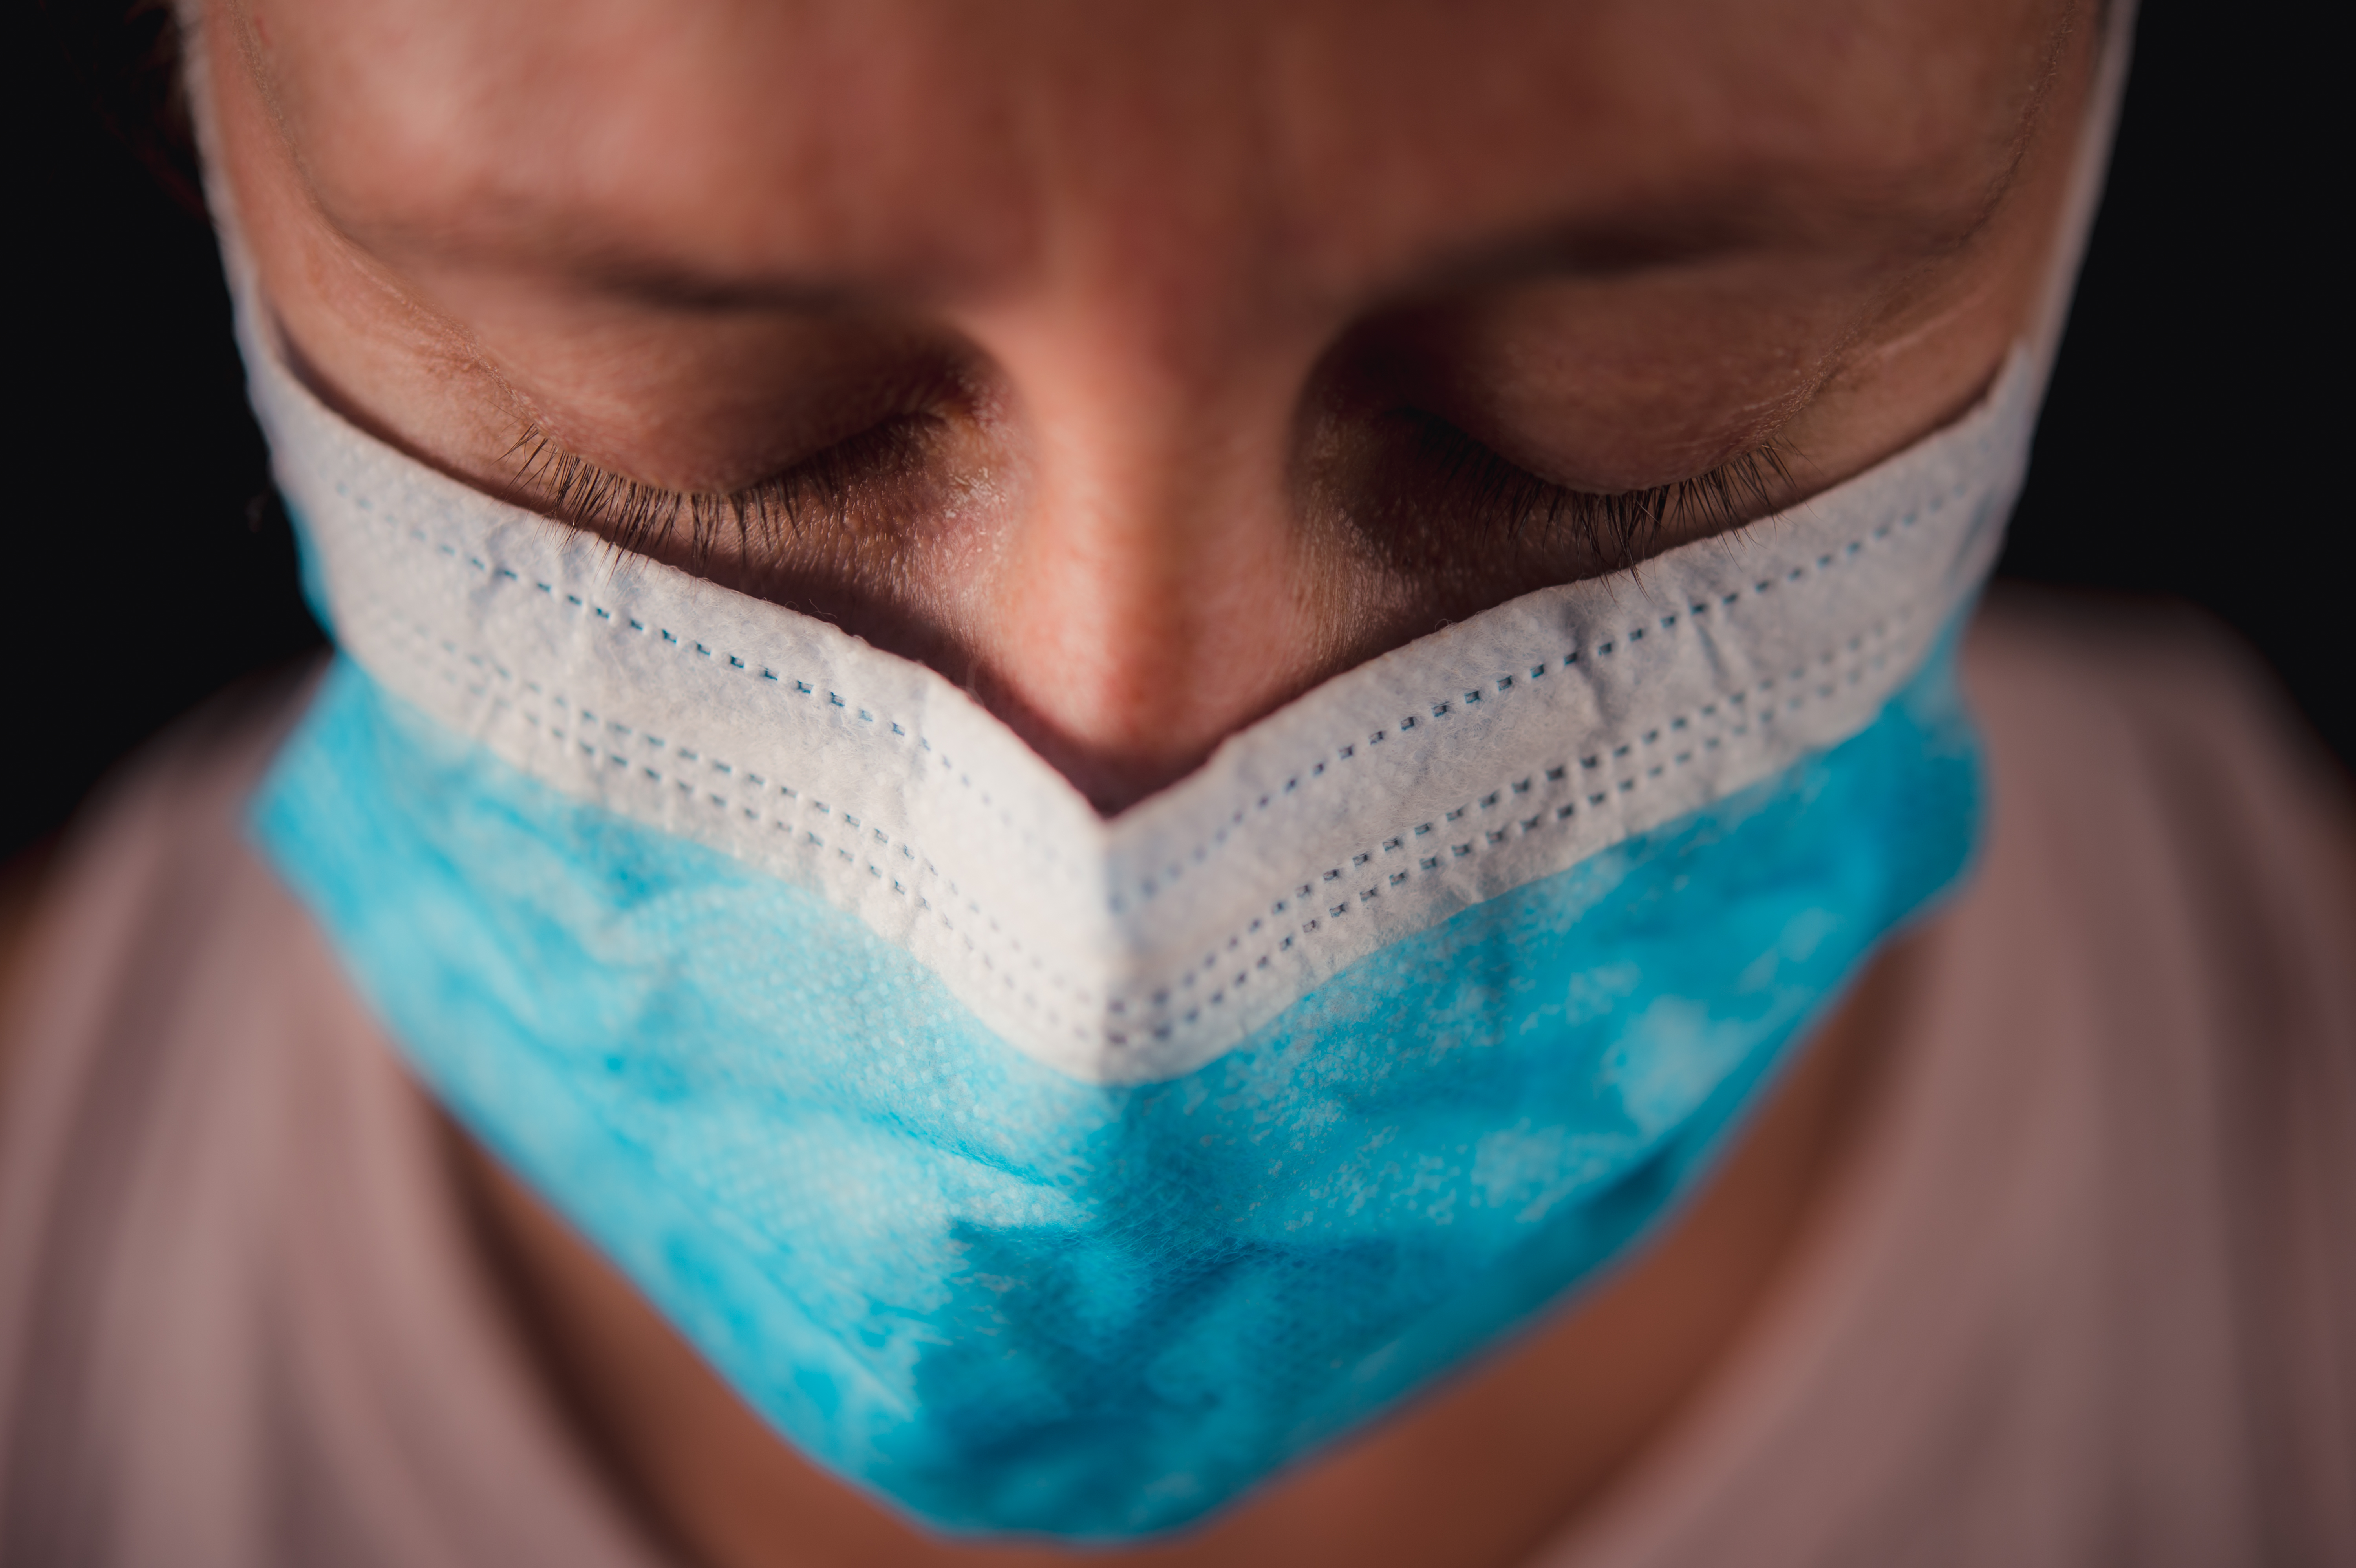 Surgical Mask Close-up headshot portrait with a black background. A beautiful 40-44-year-old woman looking down close-up of her eyelids. Her right eye is wet from running tears. She is sad and emotionally distressed.